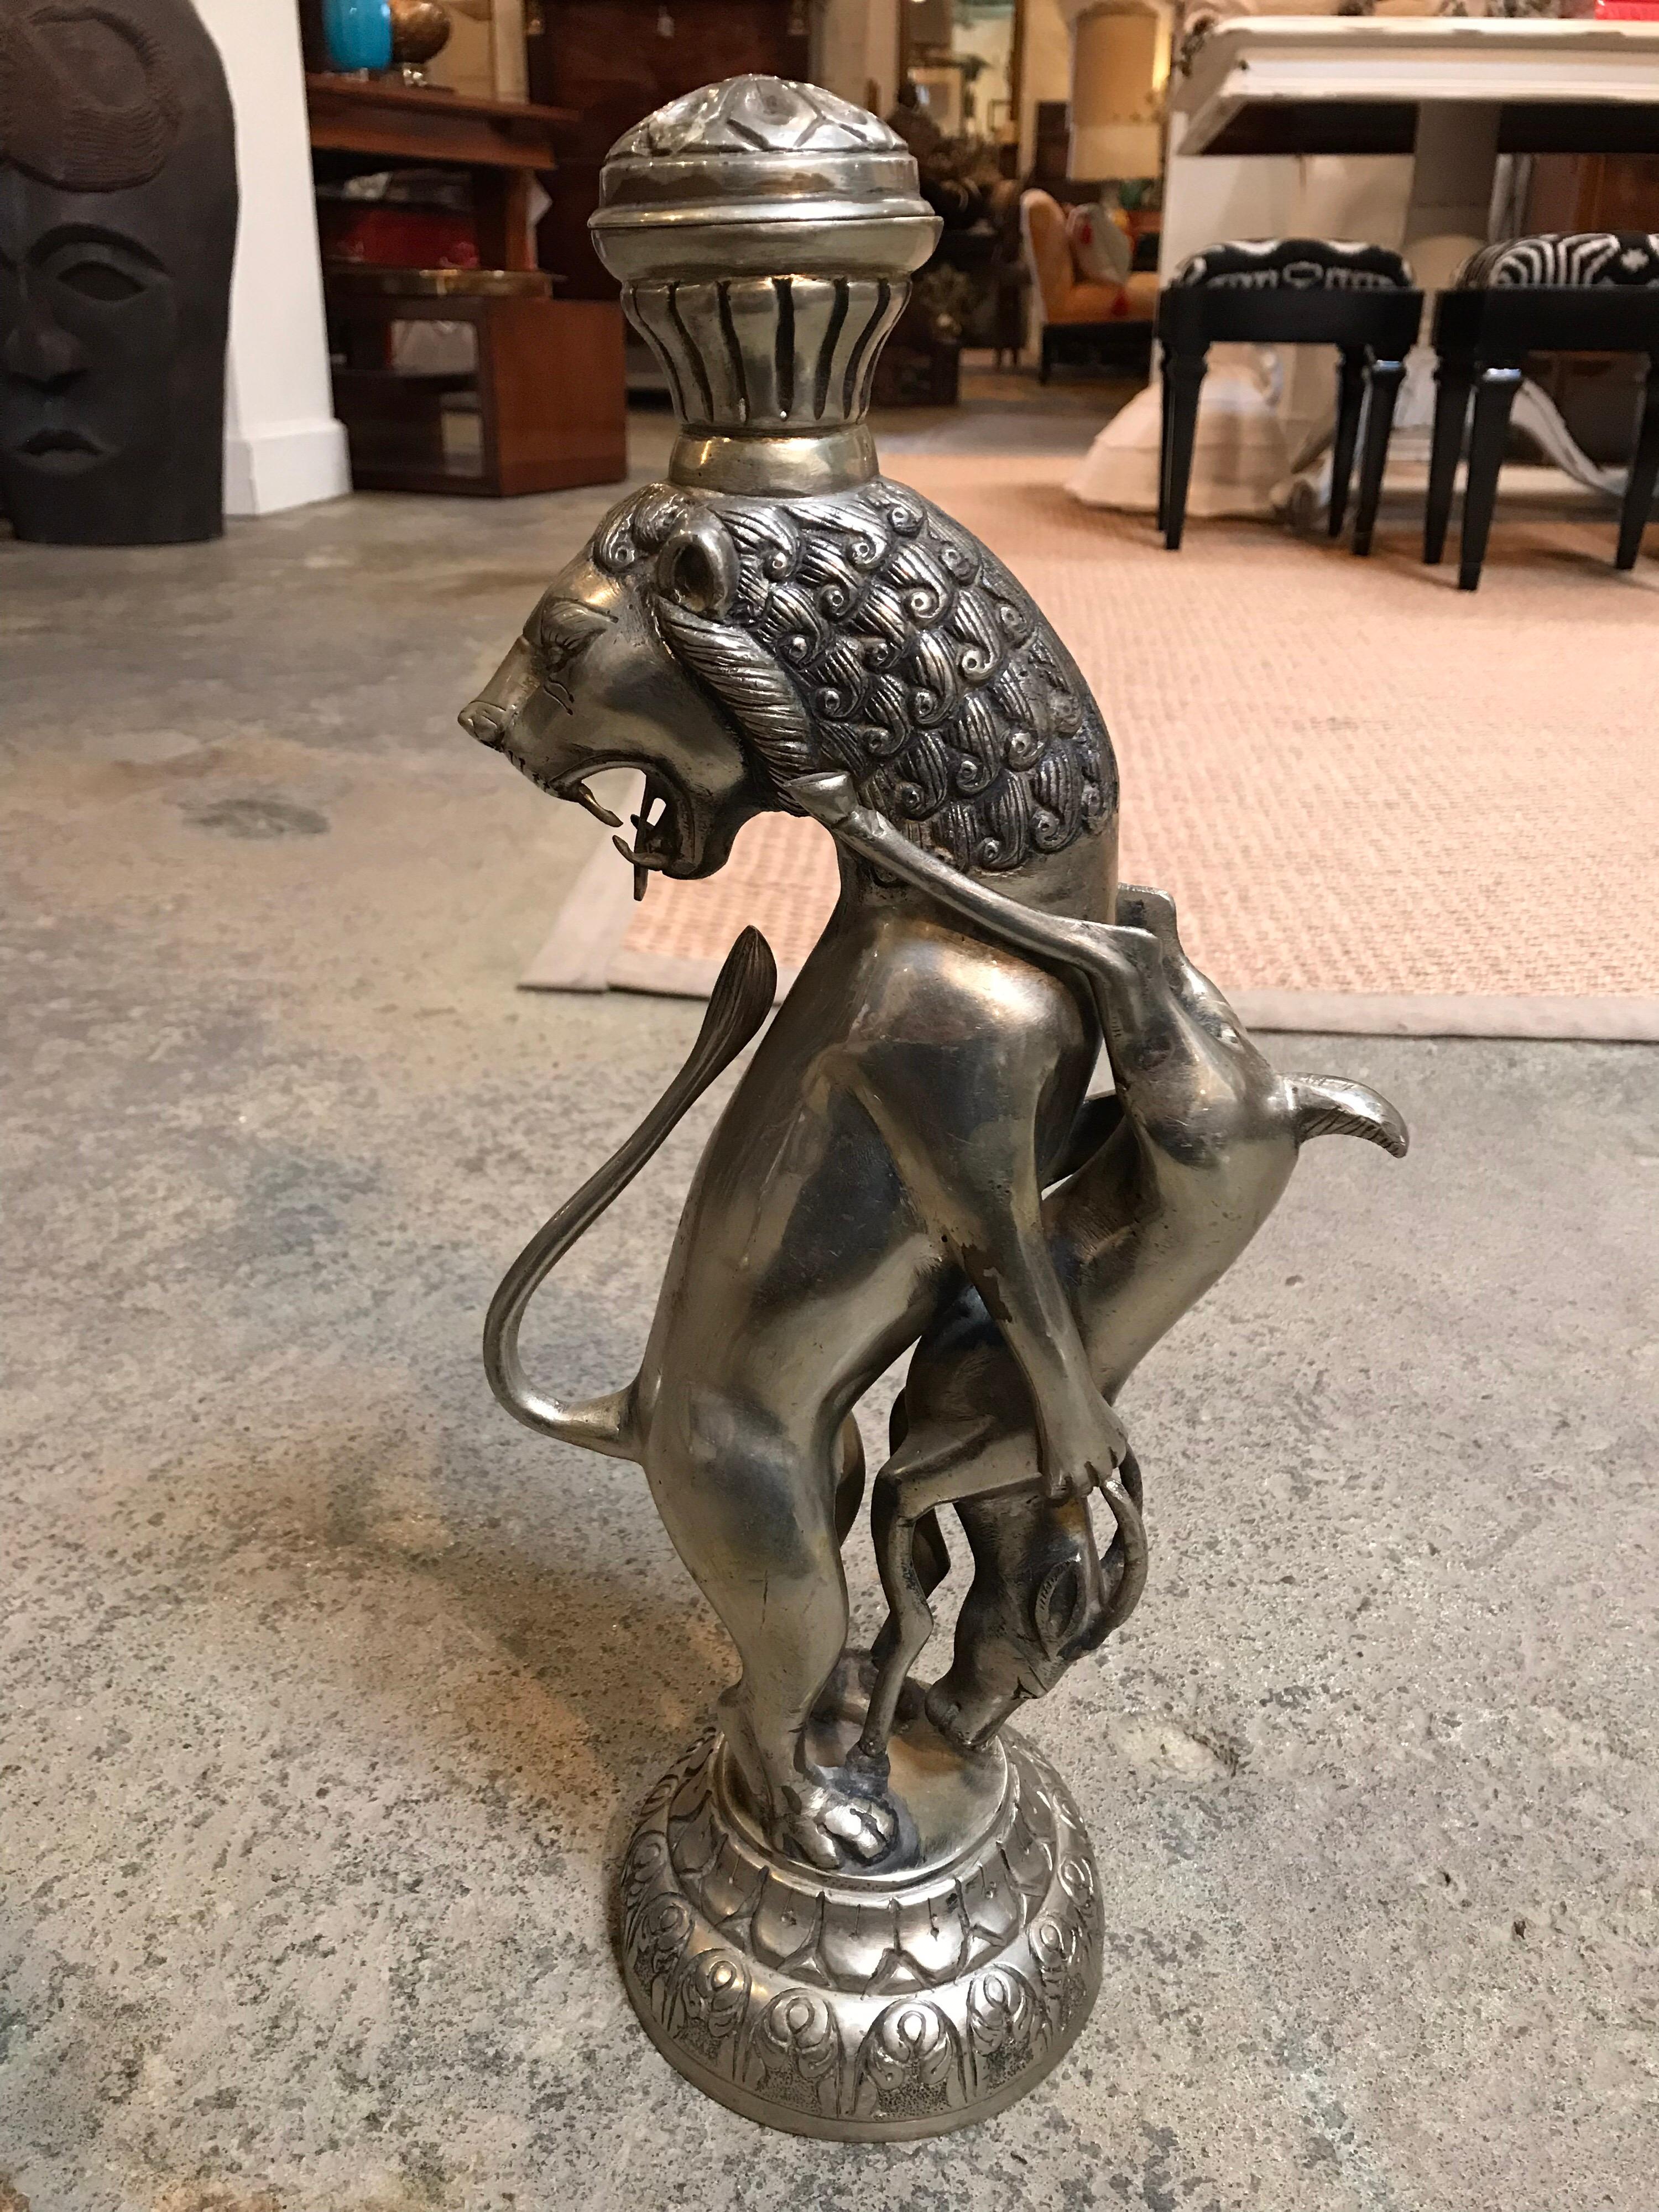 This pair of metallic figurines are cast silver and iron and are very detailed and distinguished. The lion is standing up roaring behind him holding an upside down deer facing towards the lion.